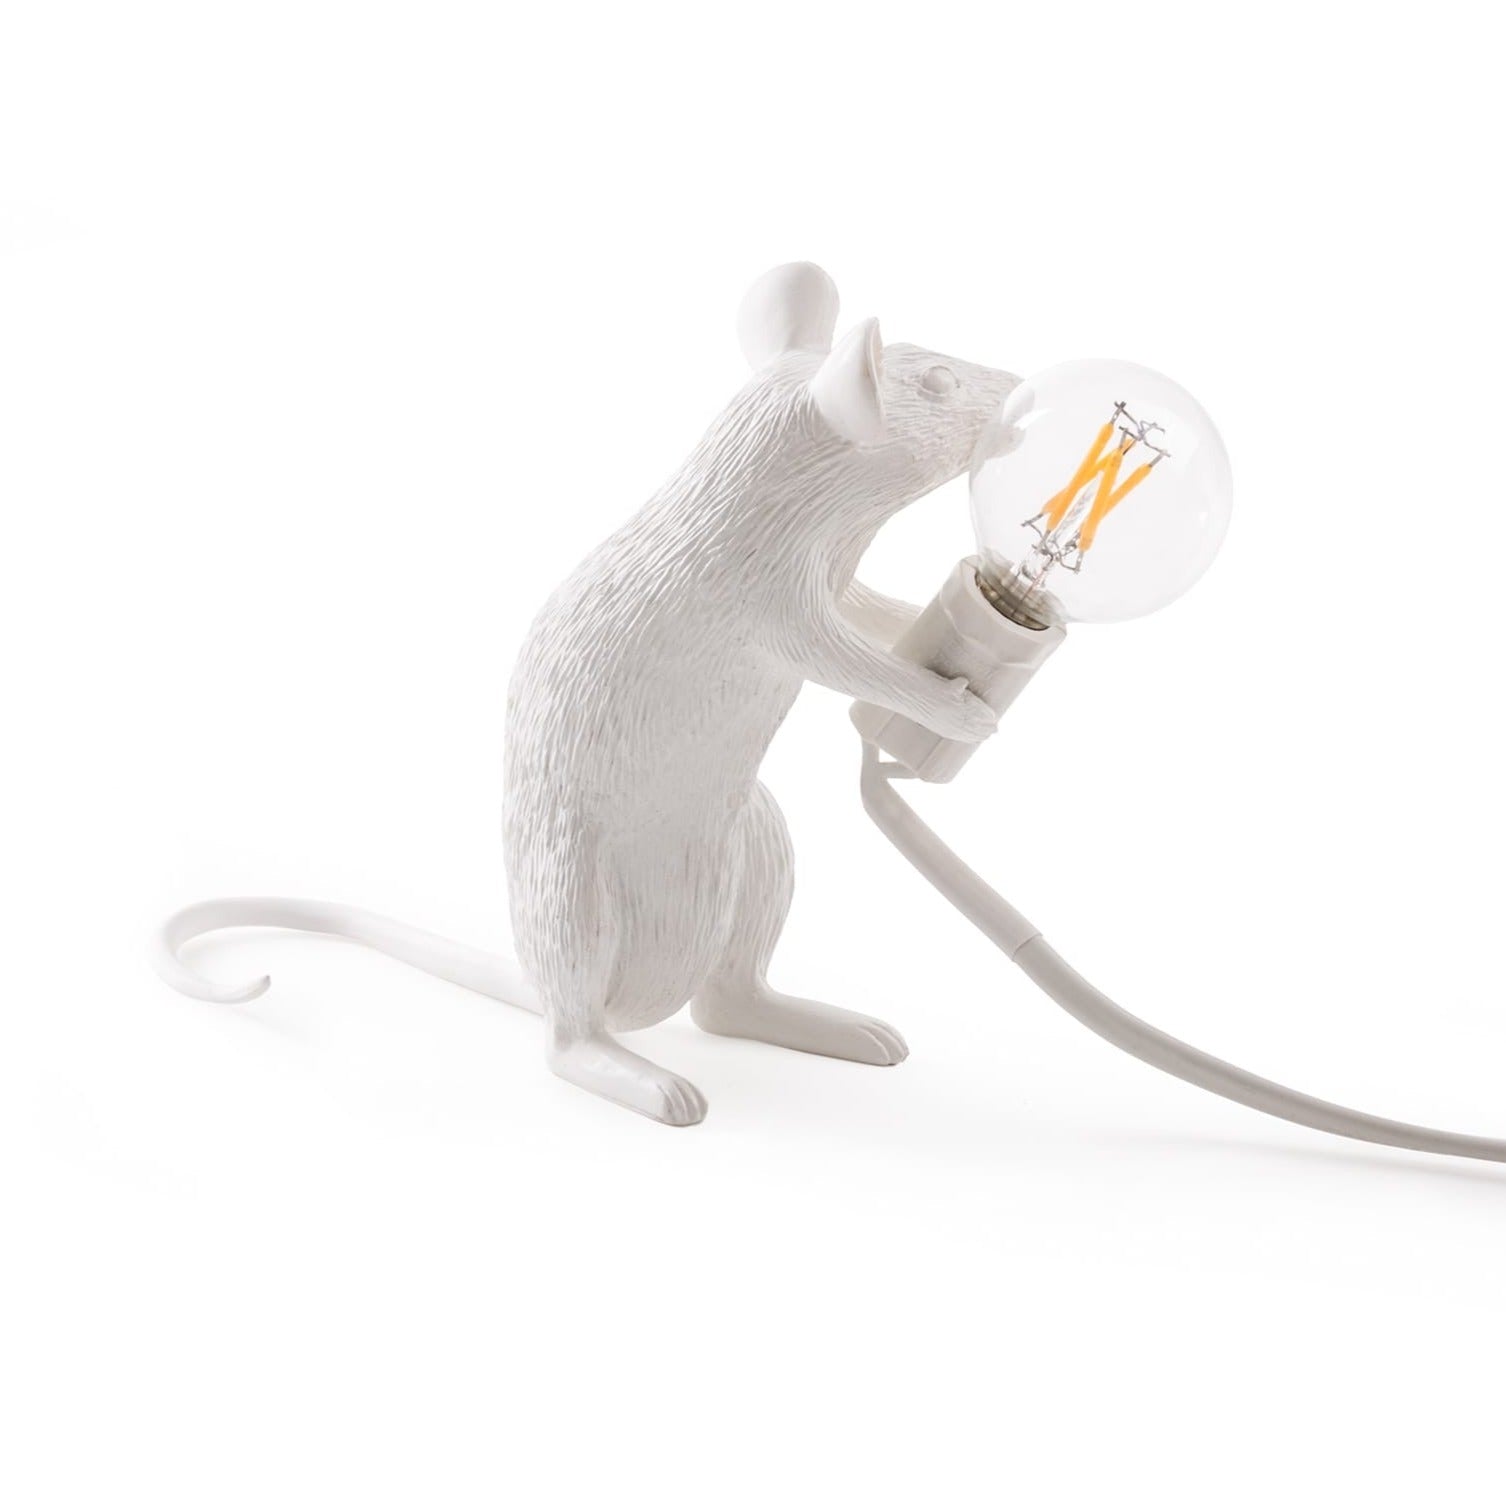 Side view of Crouching Mouse Lamp